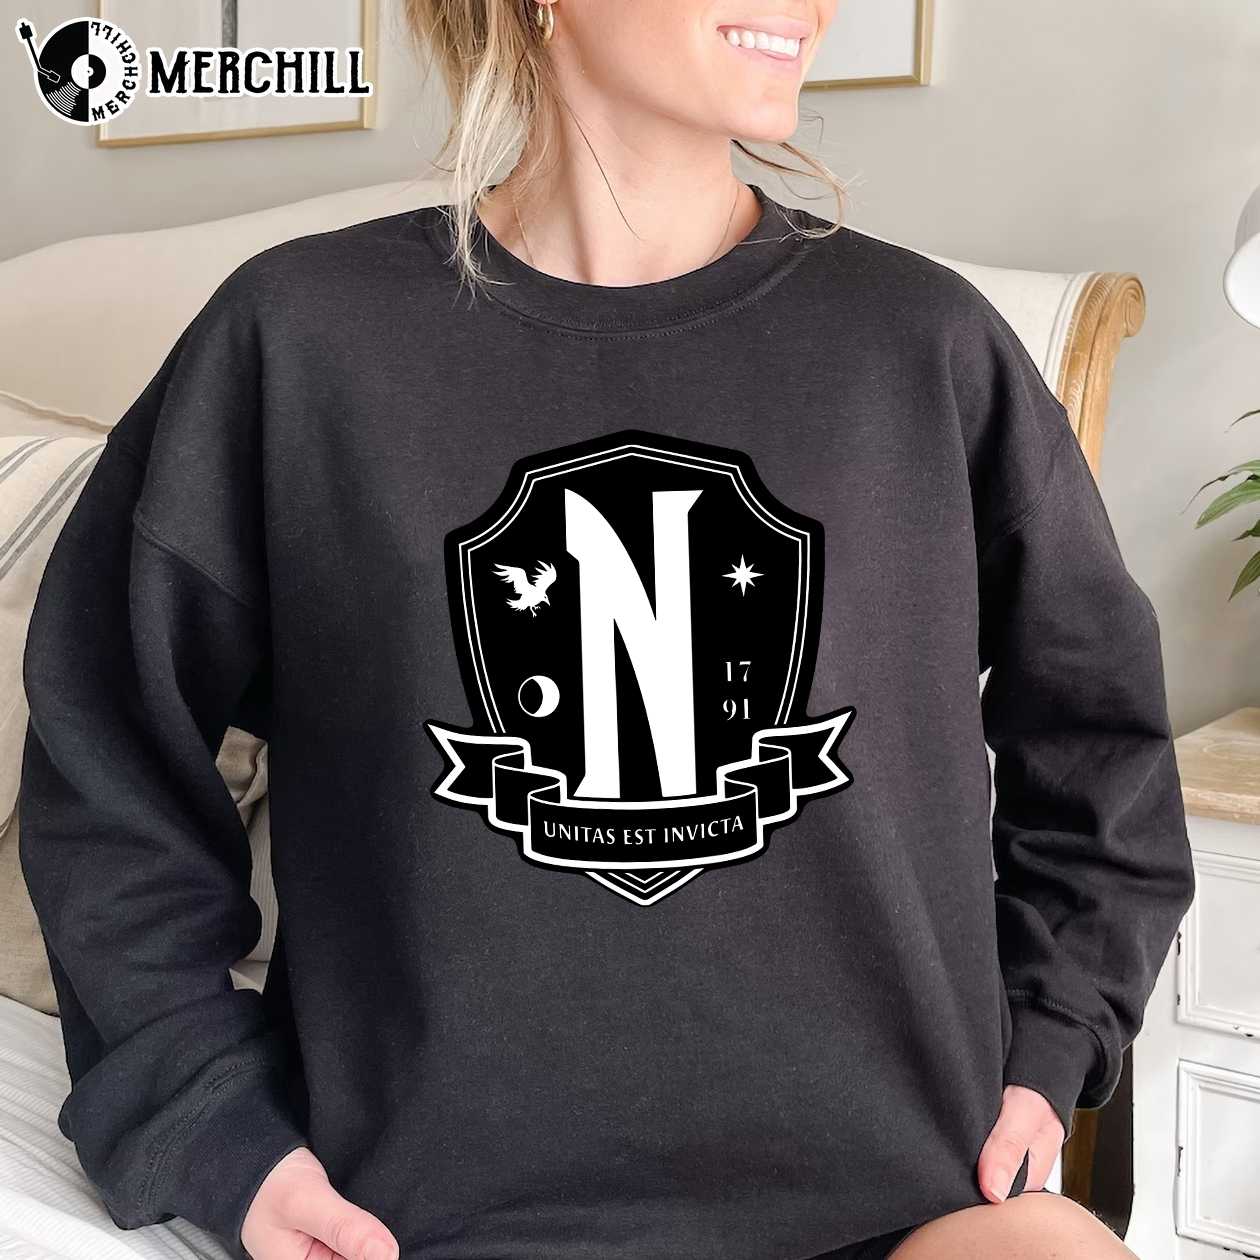 Nevermore Academy T-Shirt, Wednesday Addams Sweatshirt, Wednesday Shirt,  Horror Movies Shirt, Shirts for Women, Gifts for Her - Printiment